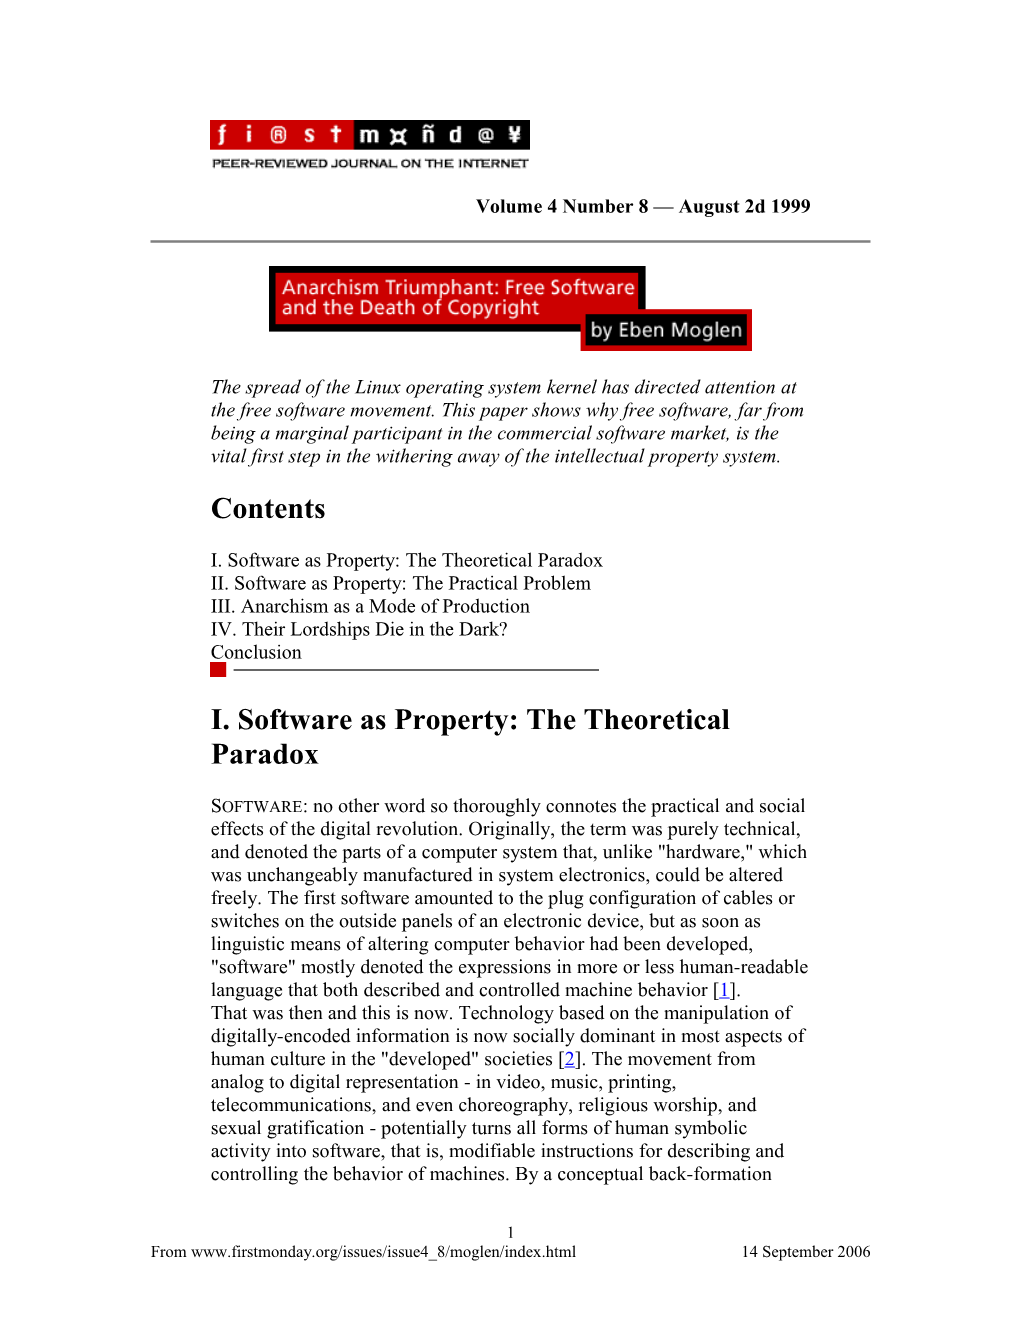 I. Software As Property: the Theoretical Paradox